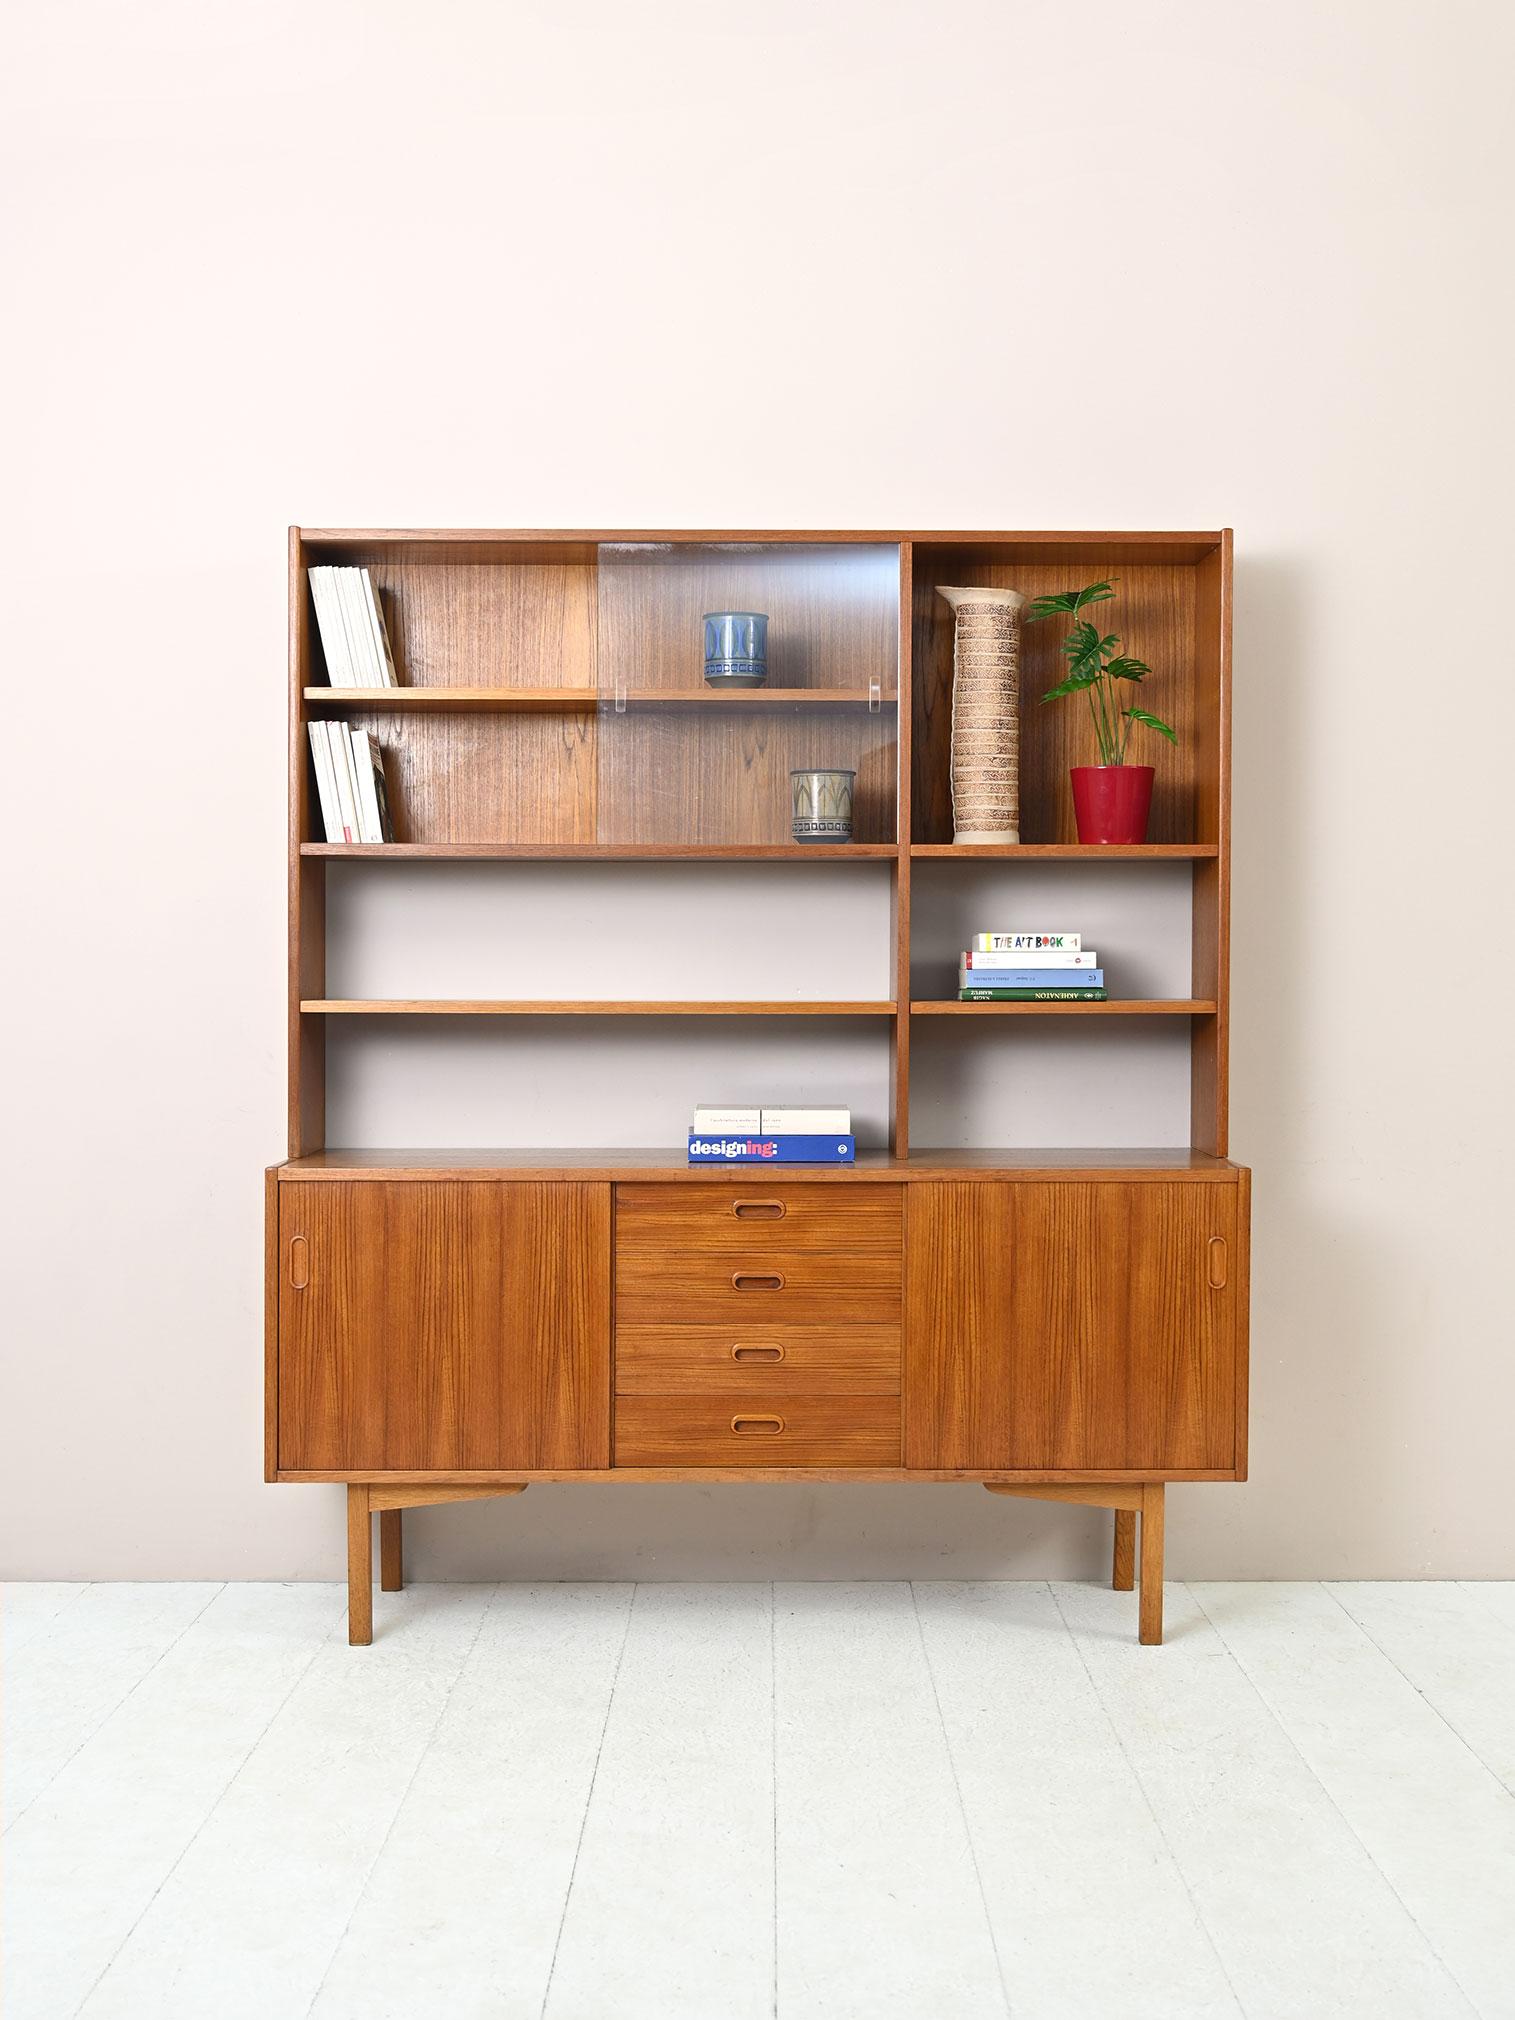 1960s teak cabinet with shelves and glass.

Original Swedish highboard consisting of two parts, the lower part is a storage cabinet with drawers and sliding doors, the upper part is a shelving system equipped with a glass cabinet.
The pronounced